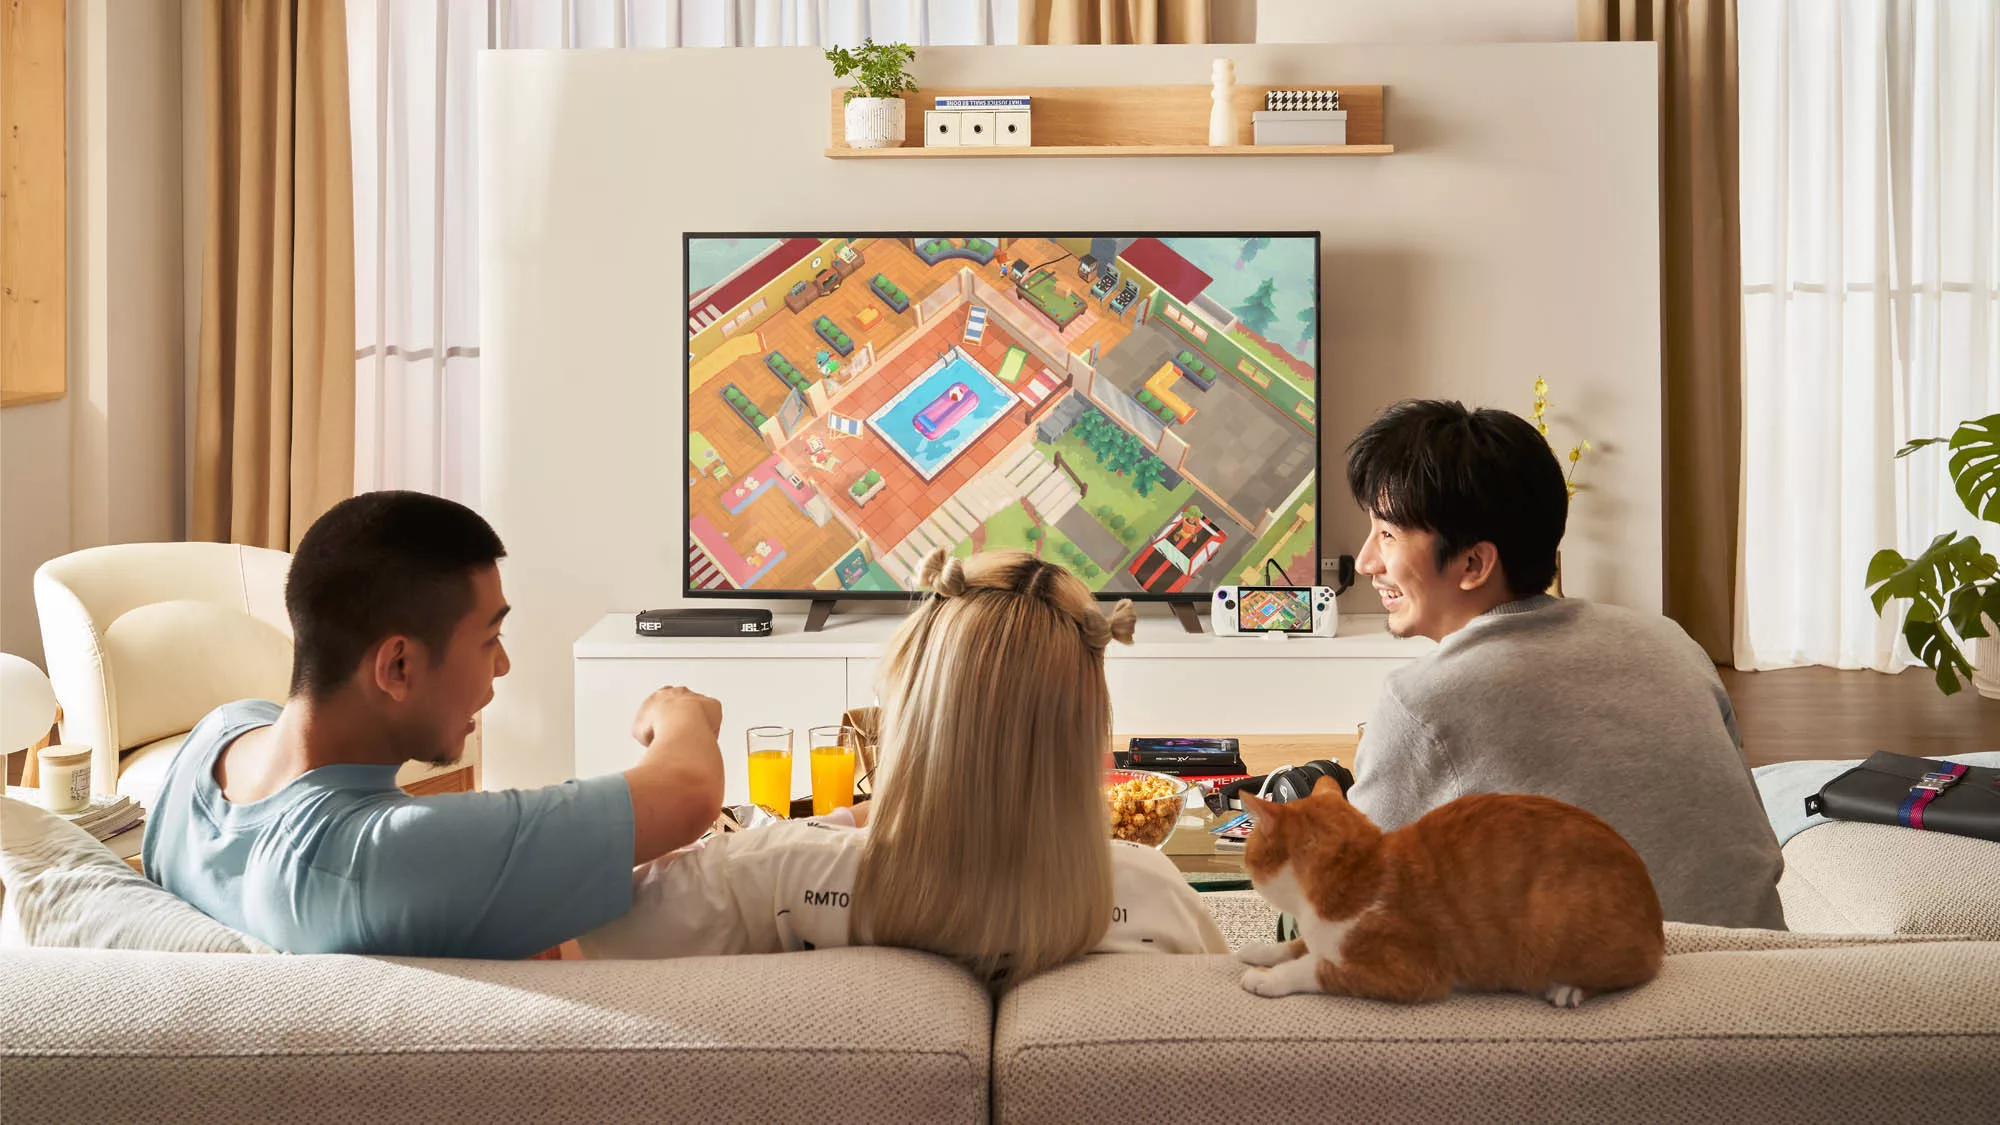 A photo of three people on a couch, playing a game on the TV in front of them.